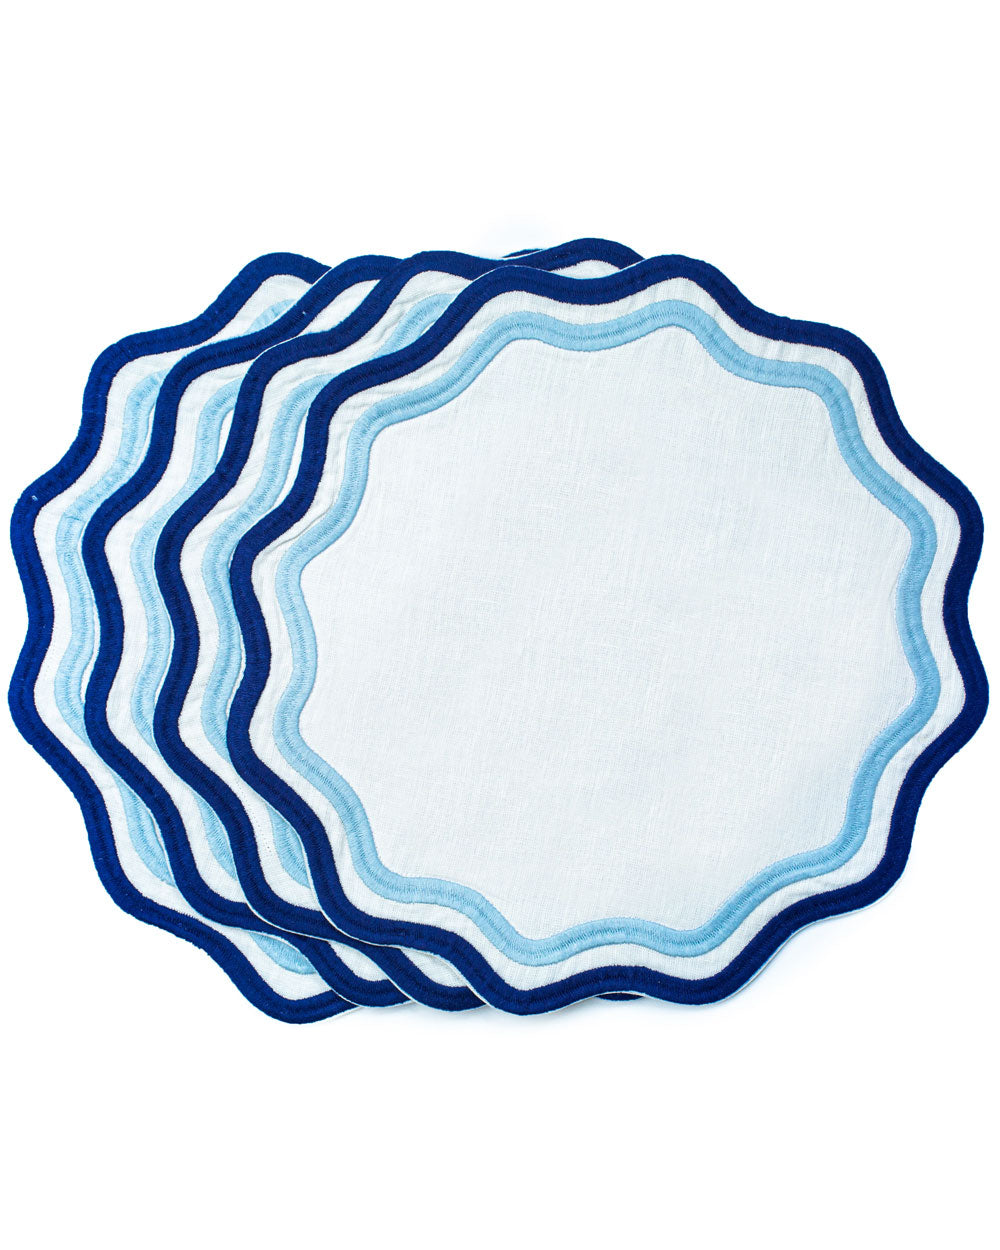 Colorblock Embroidered Linen Placemats in Blue